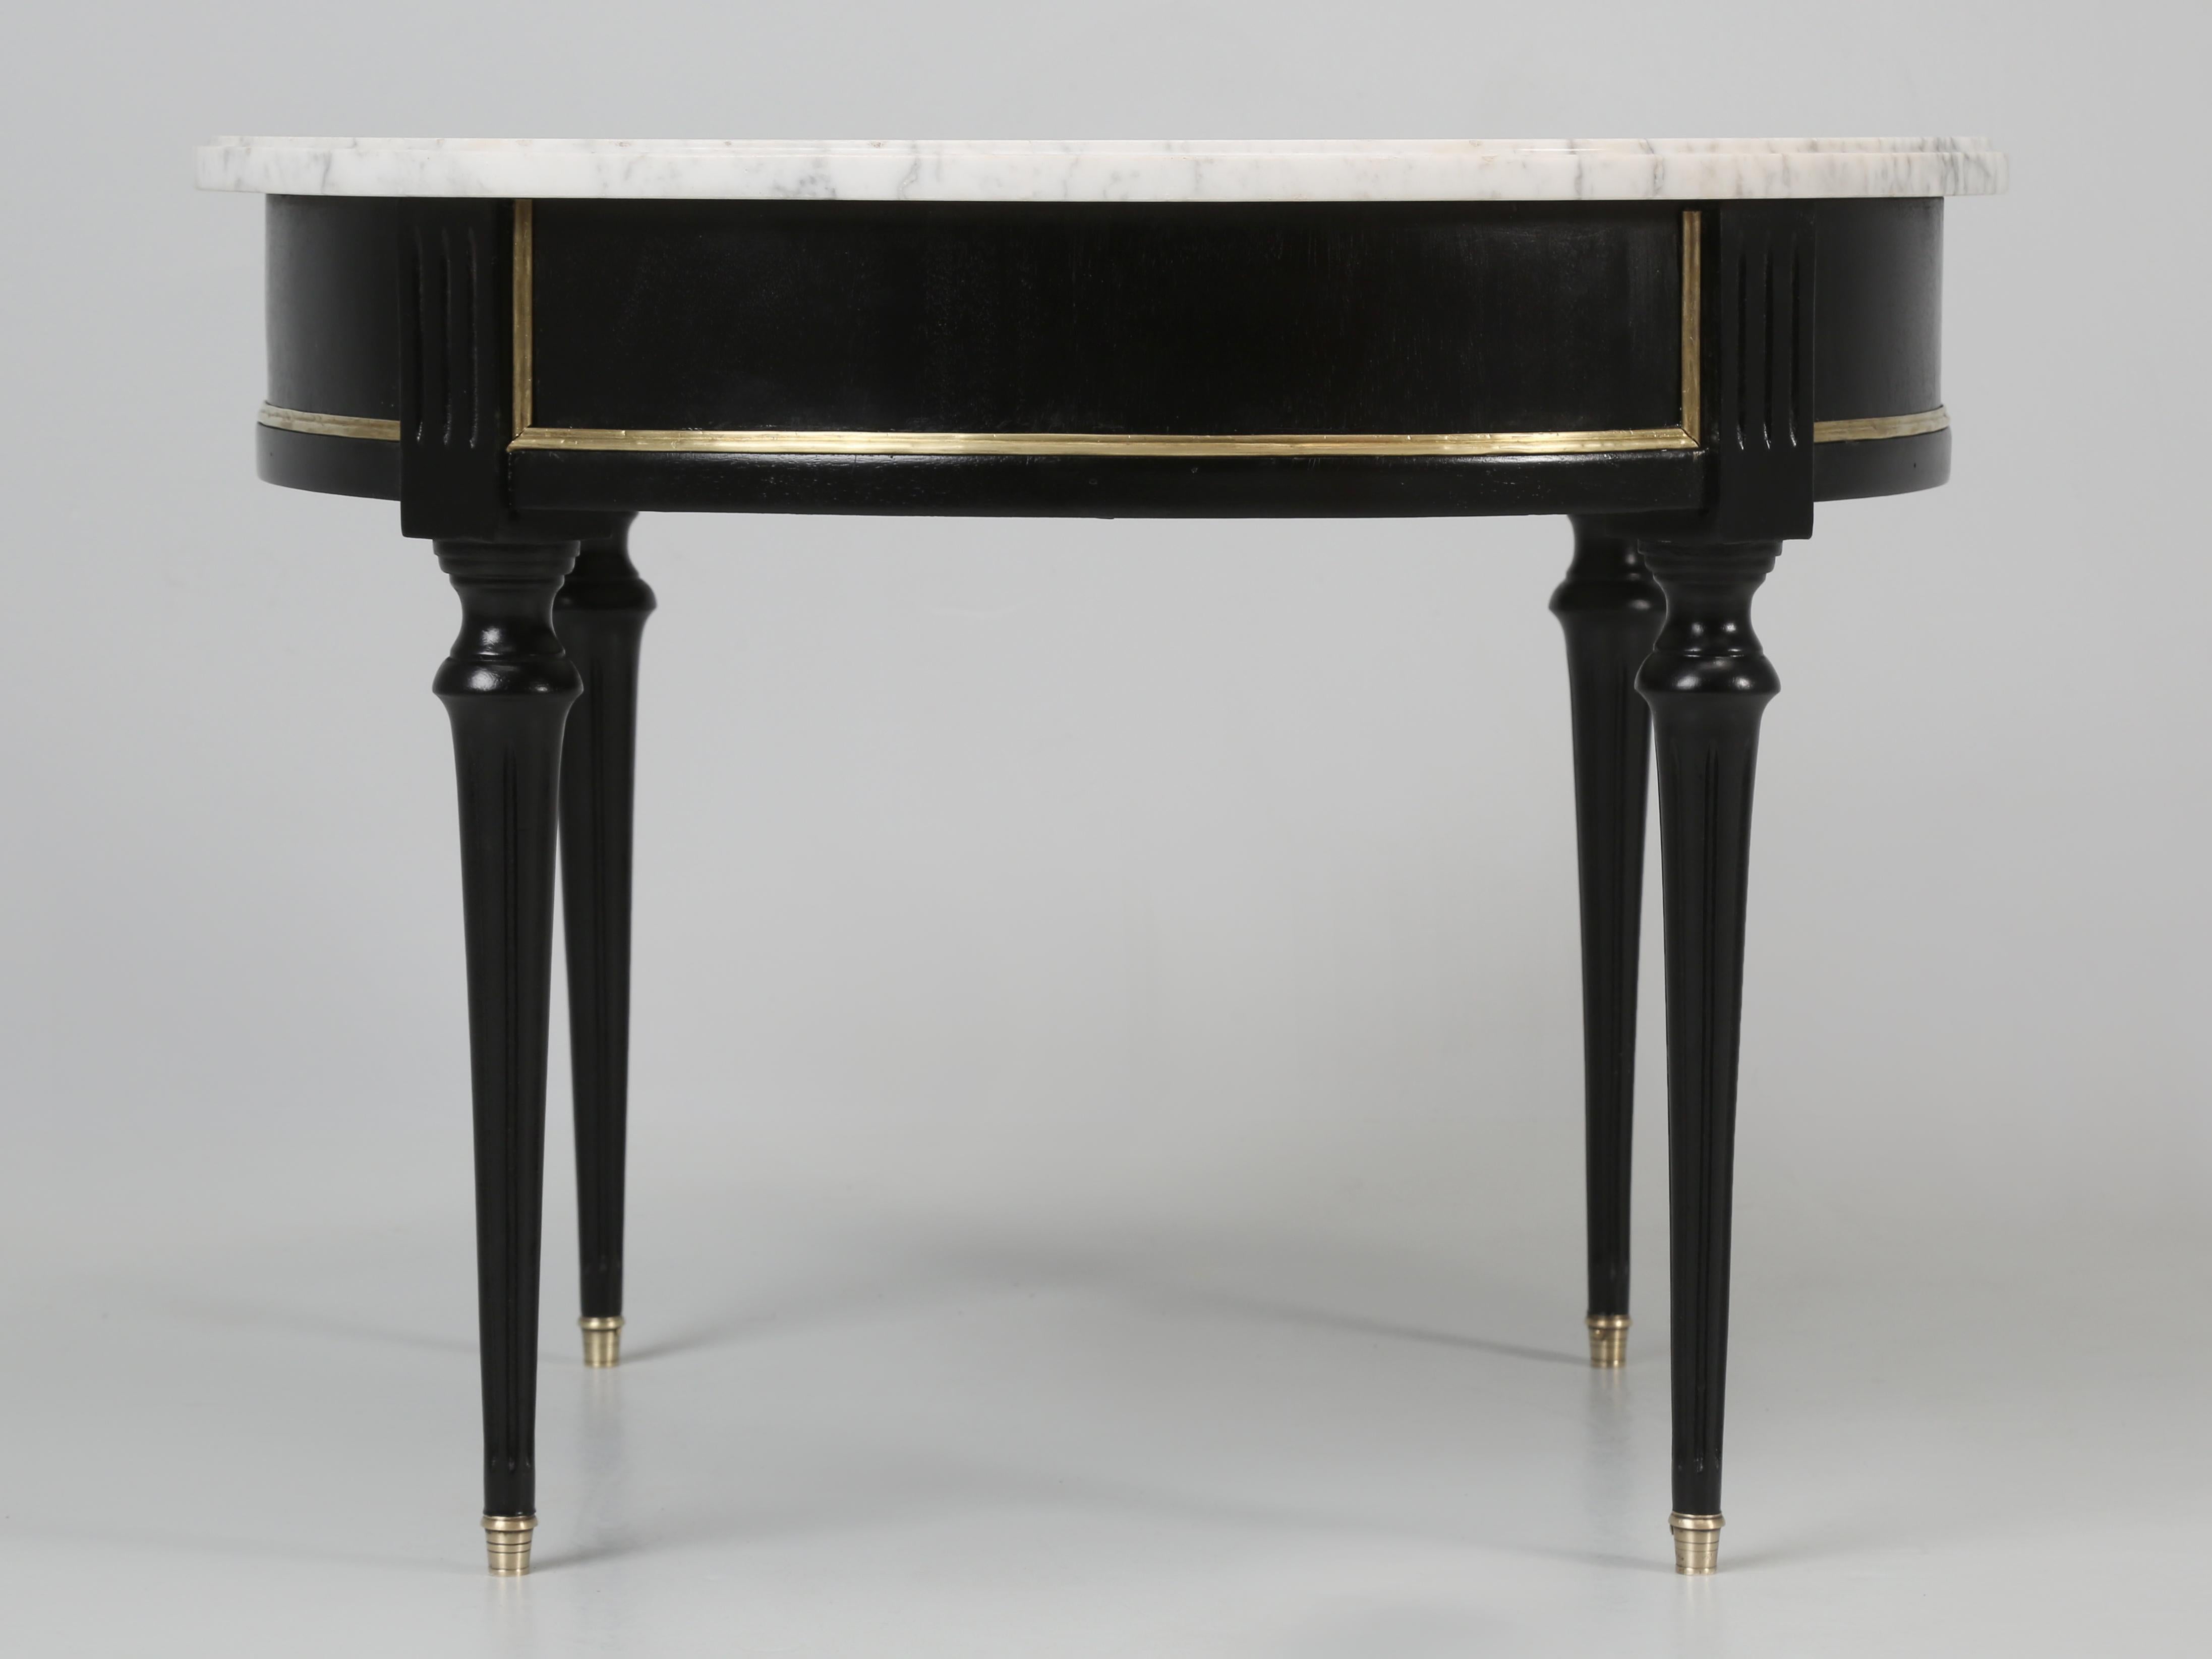 Vintage French Louis XVI Style Round Coffee Table Ebonized Finish Carrara Marble In Good Condition For Sale In Chicago, IL